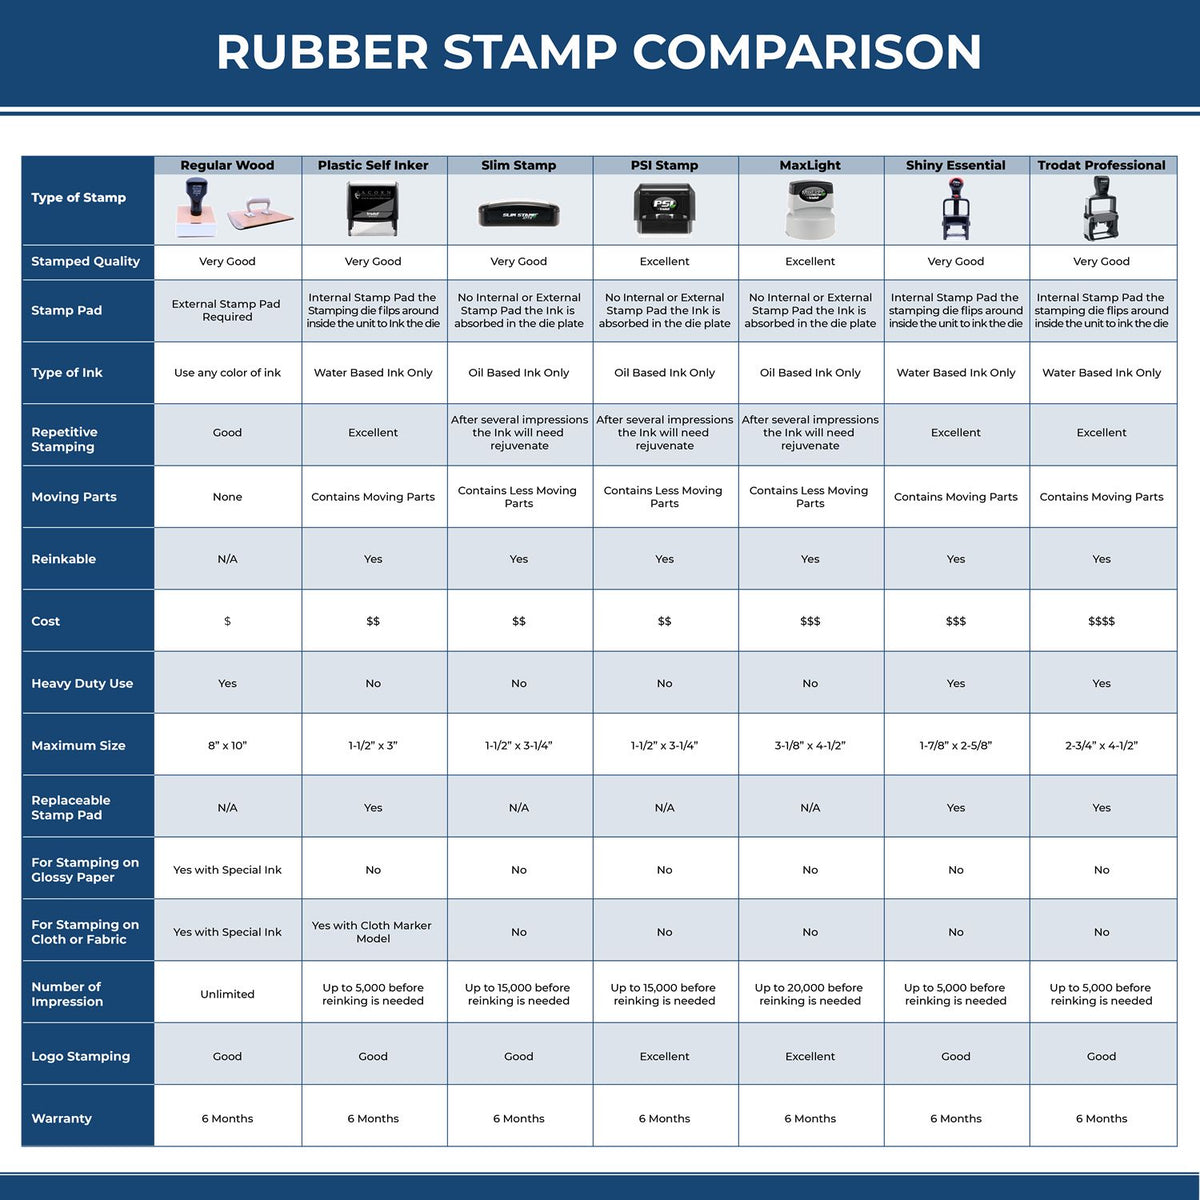 A comparison chart for the different types of mount models available for the Self-Inking Kansas PE Stamp.